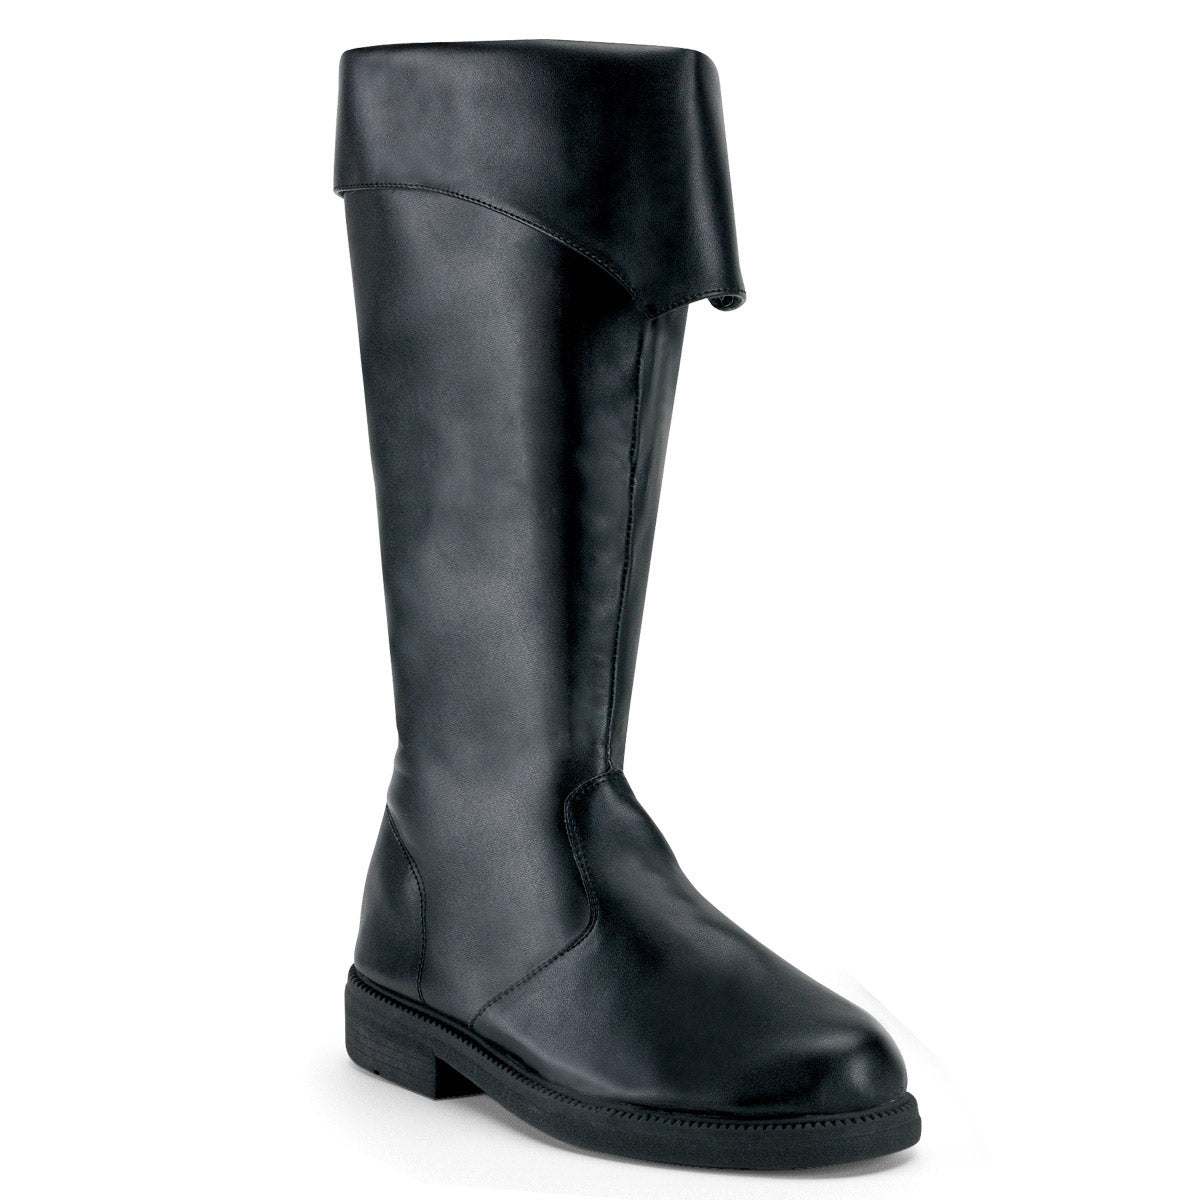 Pirate Captain Side Zipper Knee High Cuffed Round Toe Boots Shoes Pleaser Funtasma CAPTAIN/105